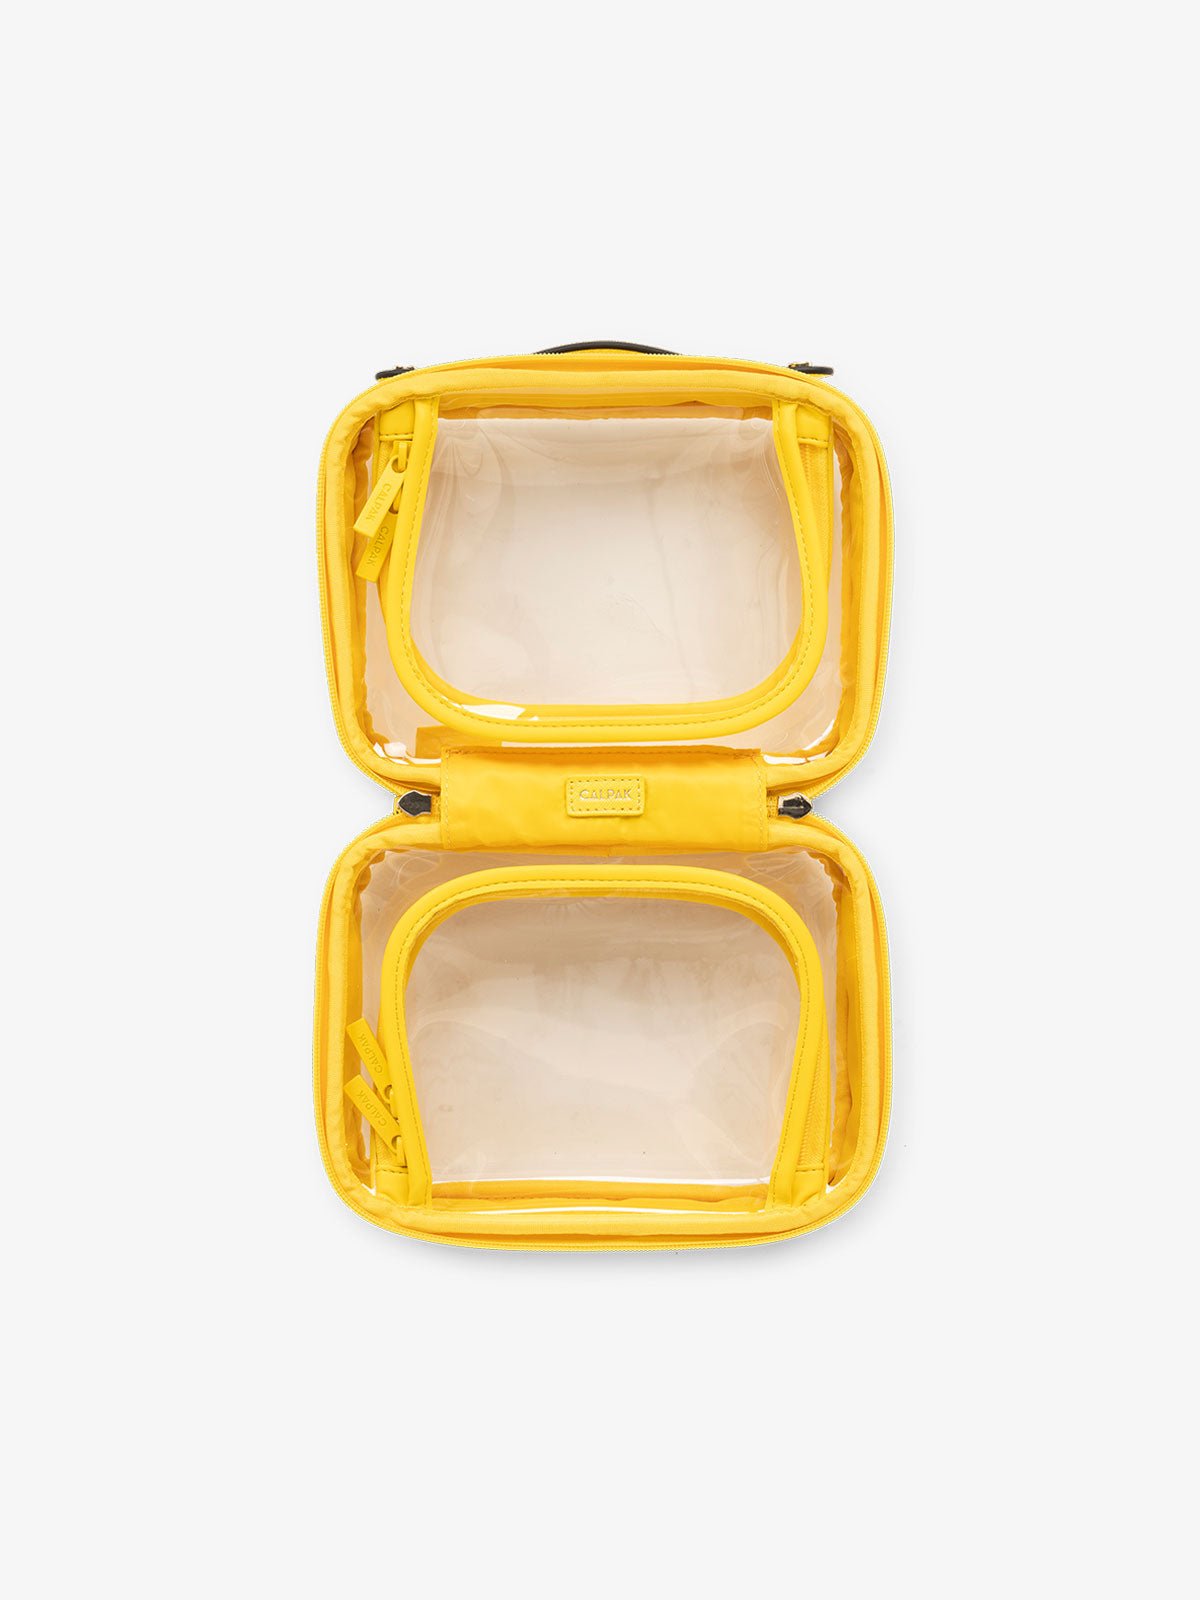 CALPAK small clear skincare bag with multiple zippered compartments in lemon yellow